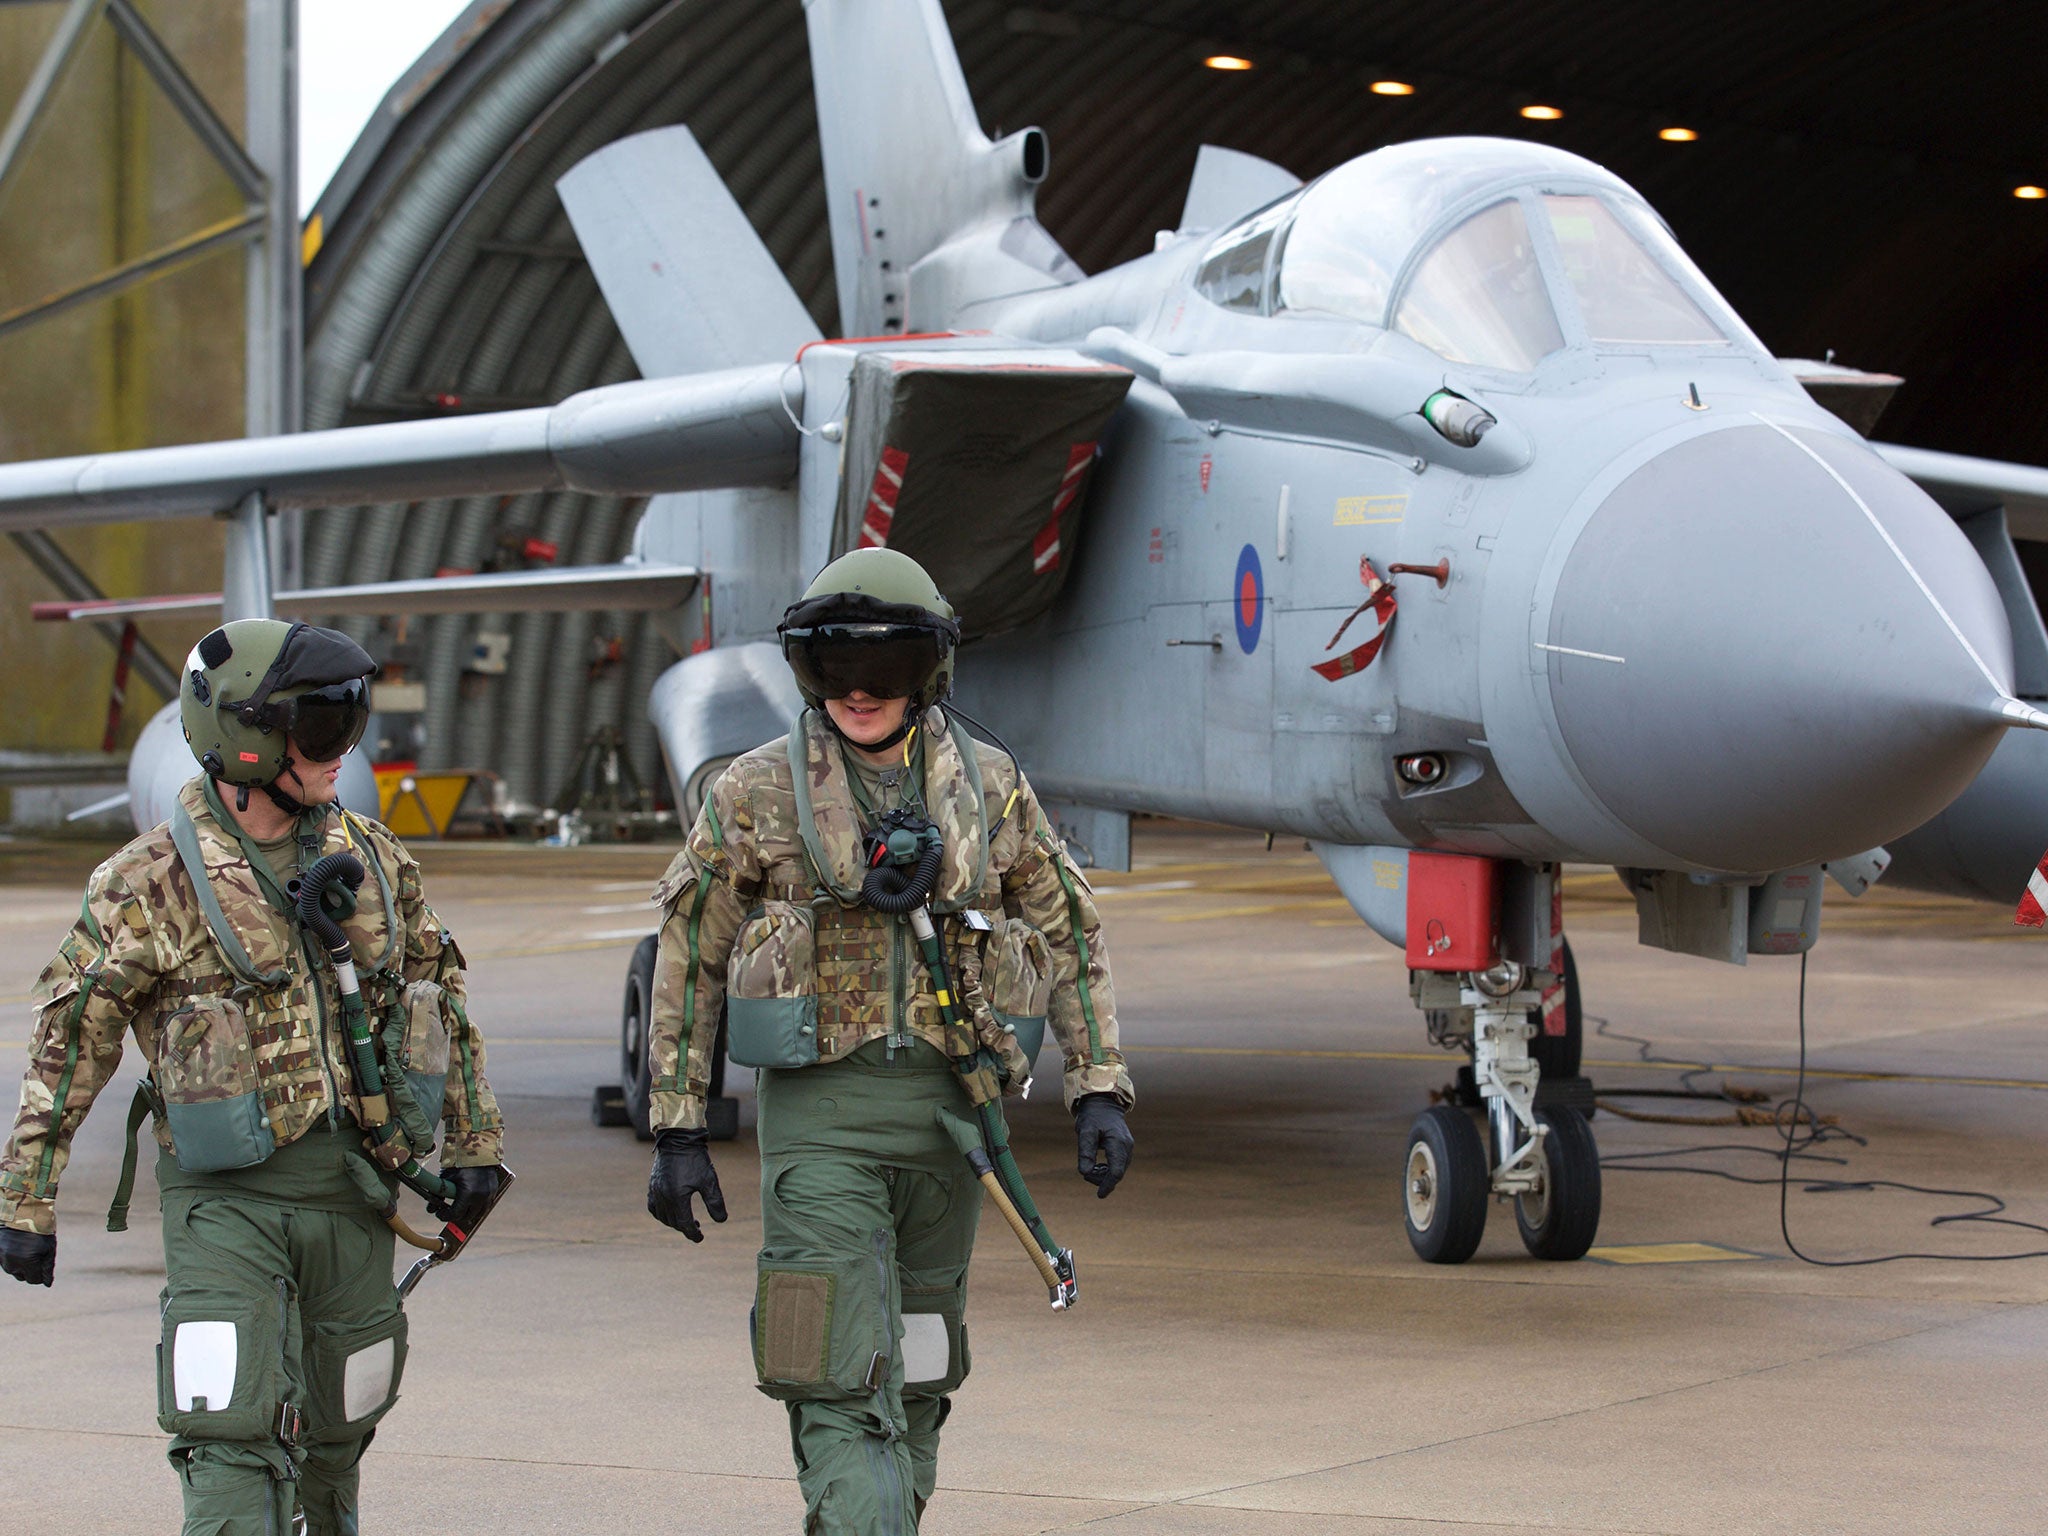 Pilots walk in front of a Tornado GR4 aircraft at the British Royal Air Force airbase RAF Marham in Norfolk in east England on December 2, 2015